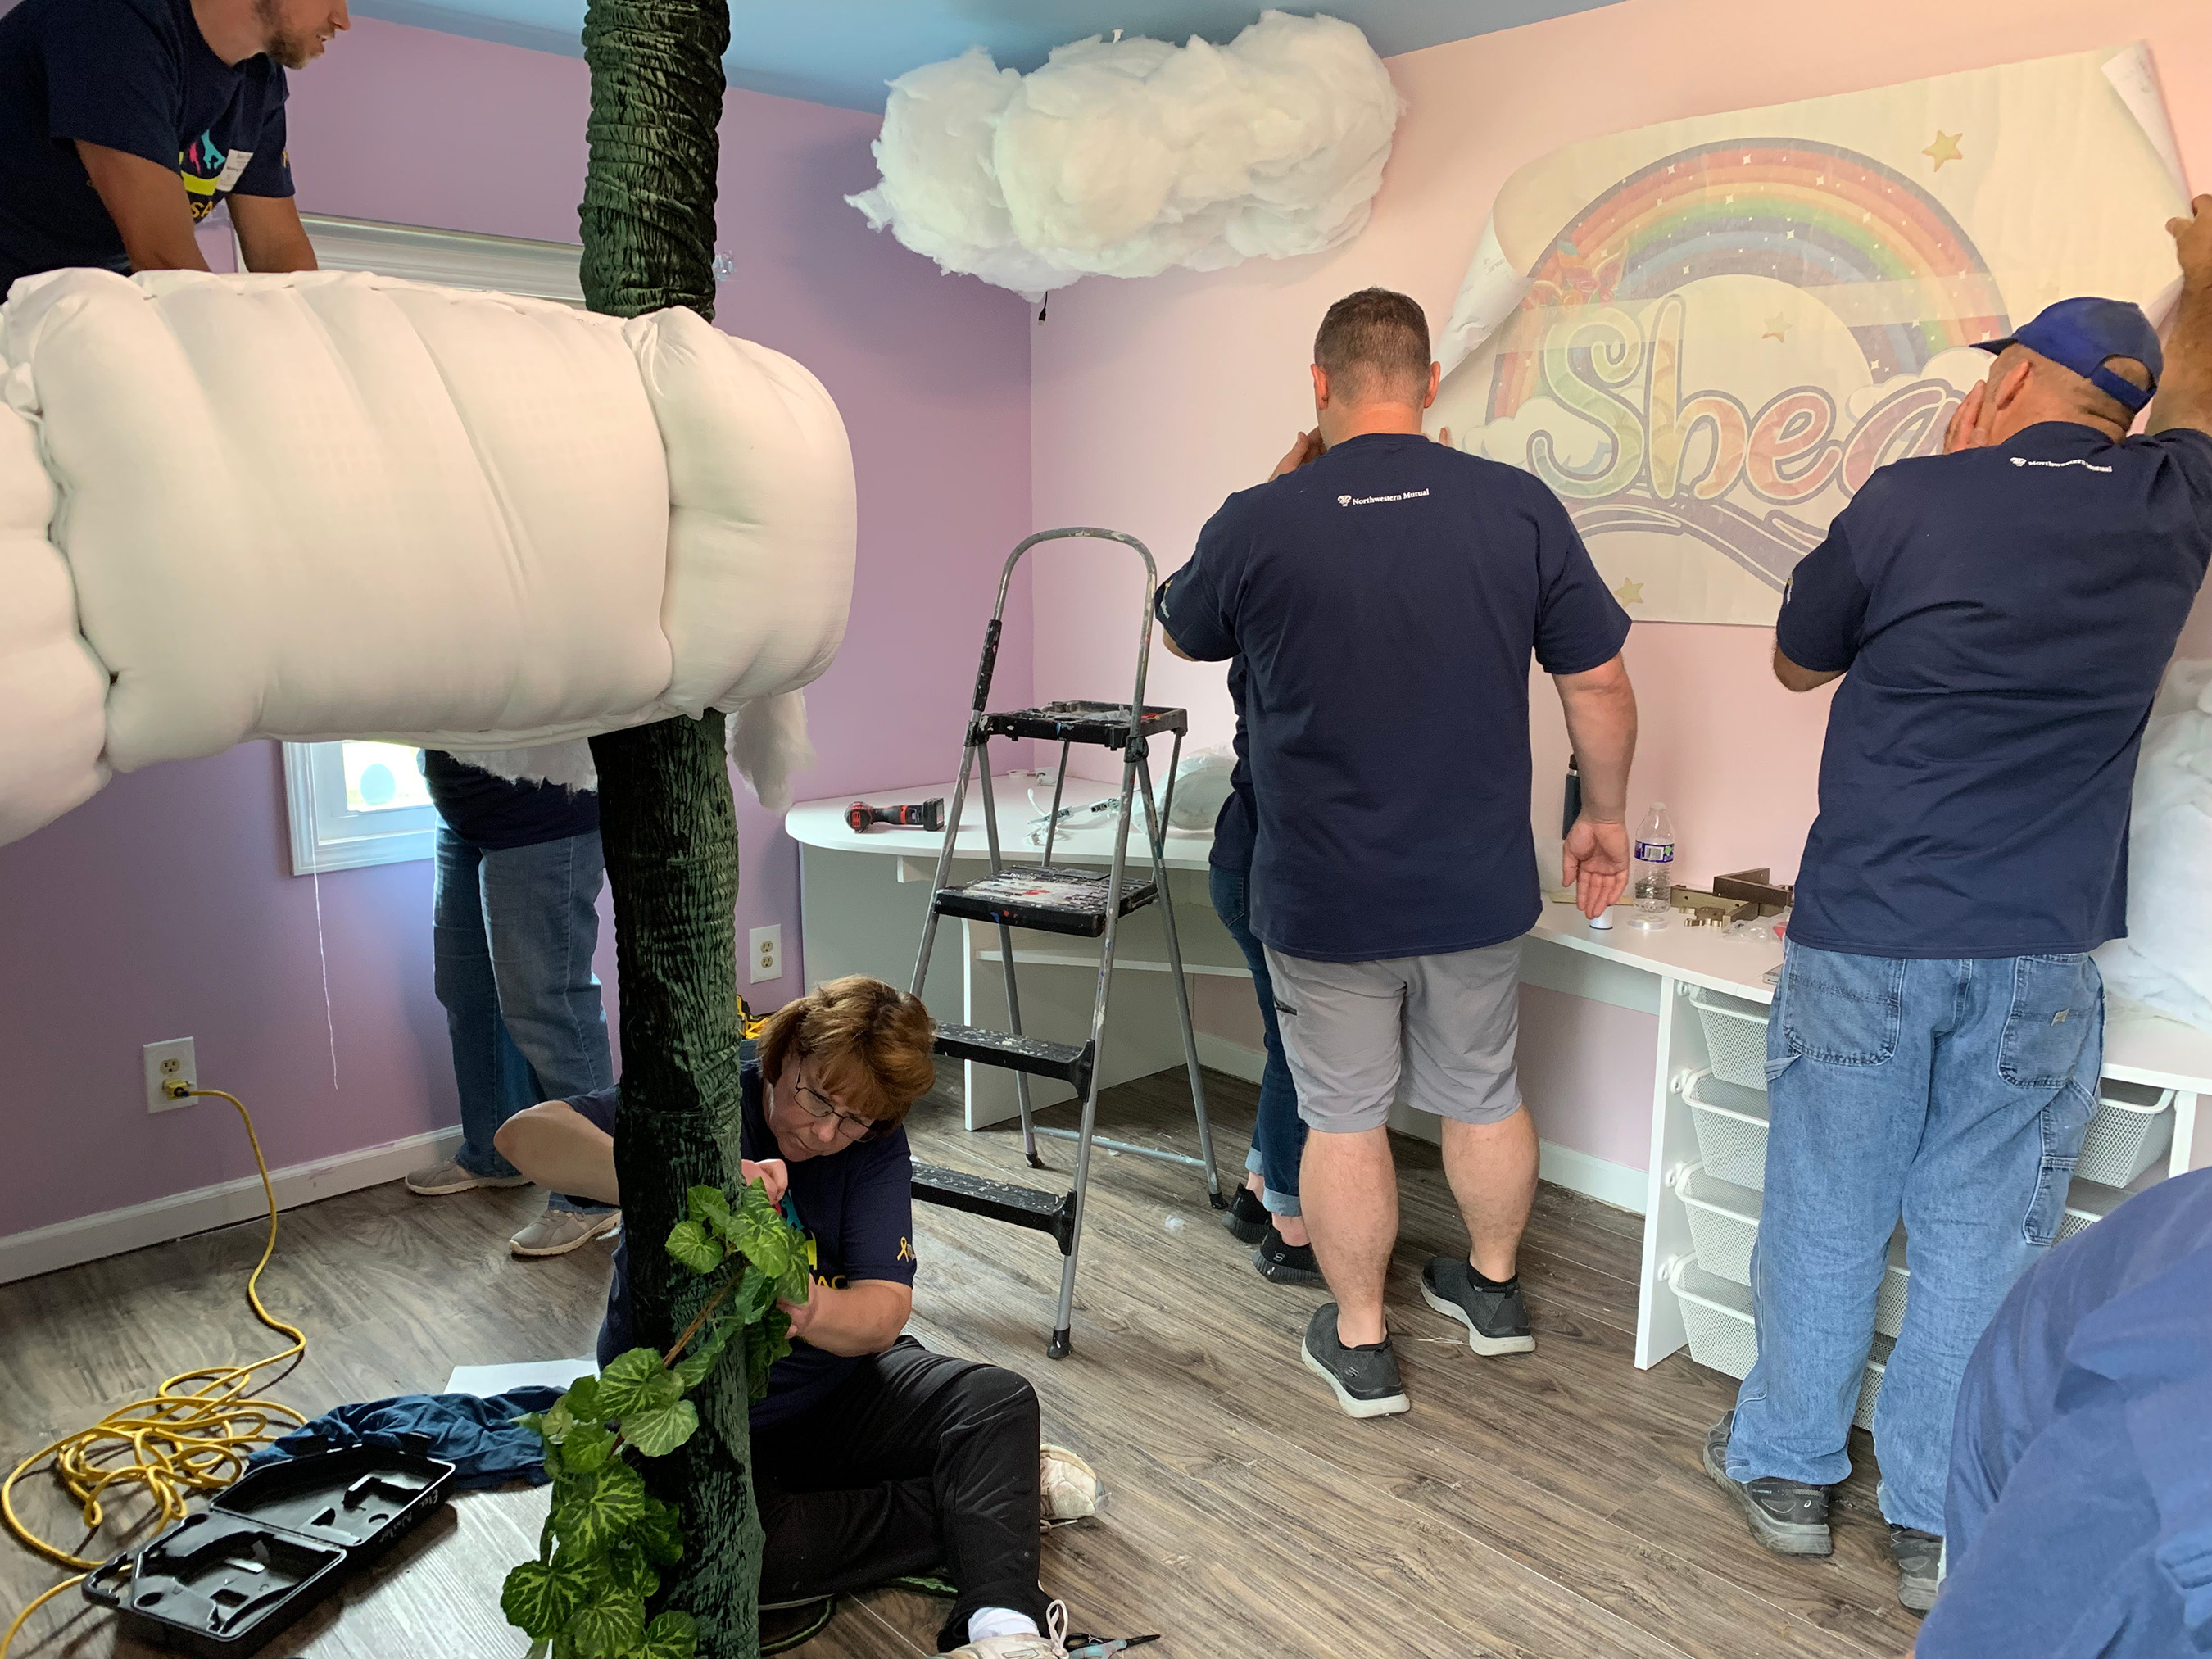 Shea’s brand-new unicorn-themed room, created by volunteers from Northwestern Mutual and Special Spaces